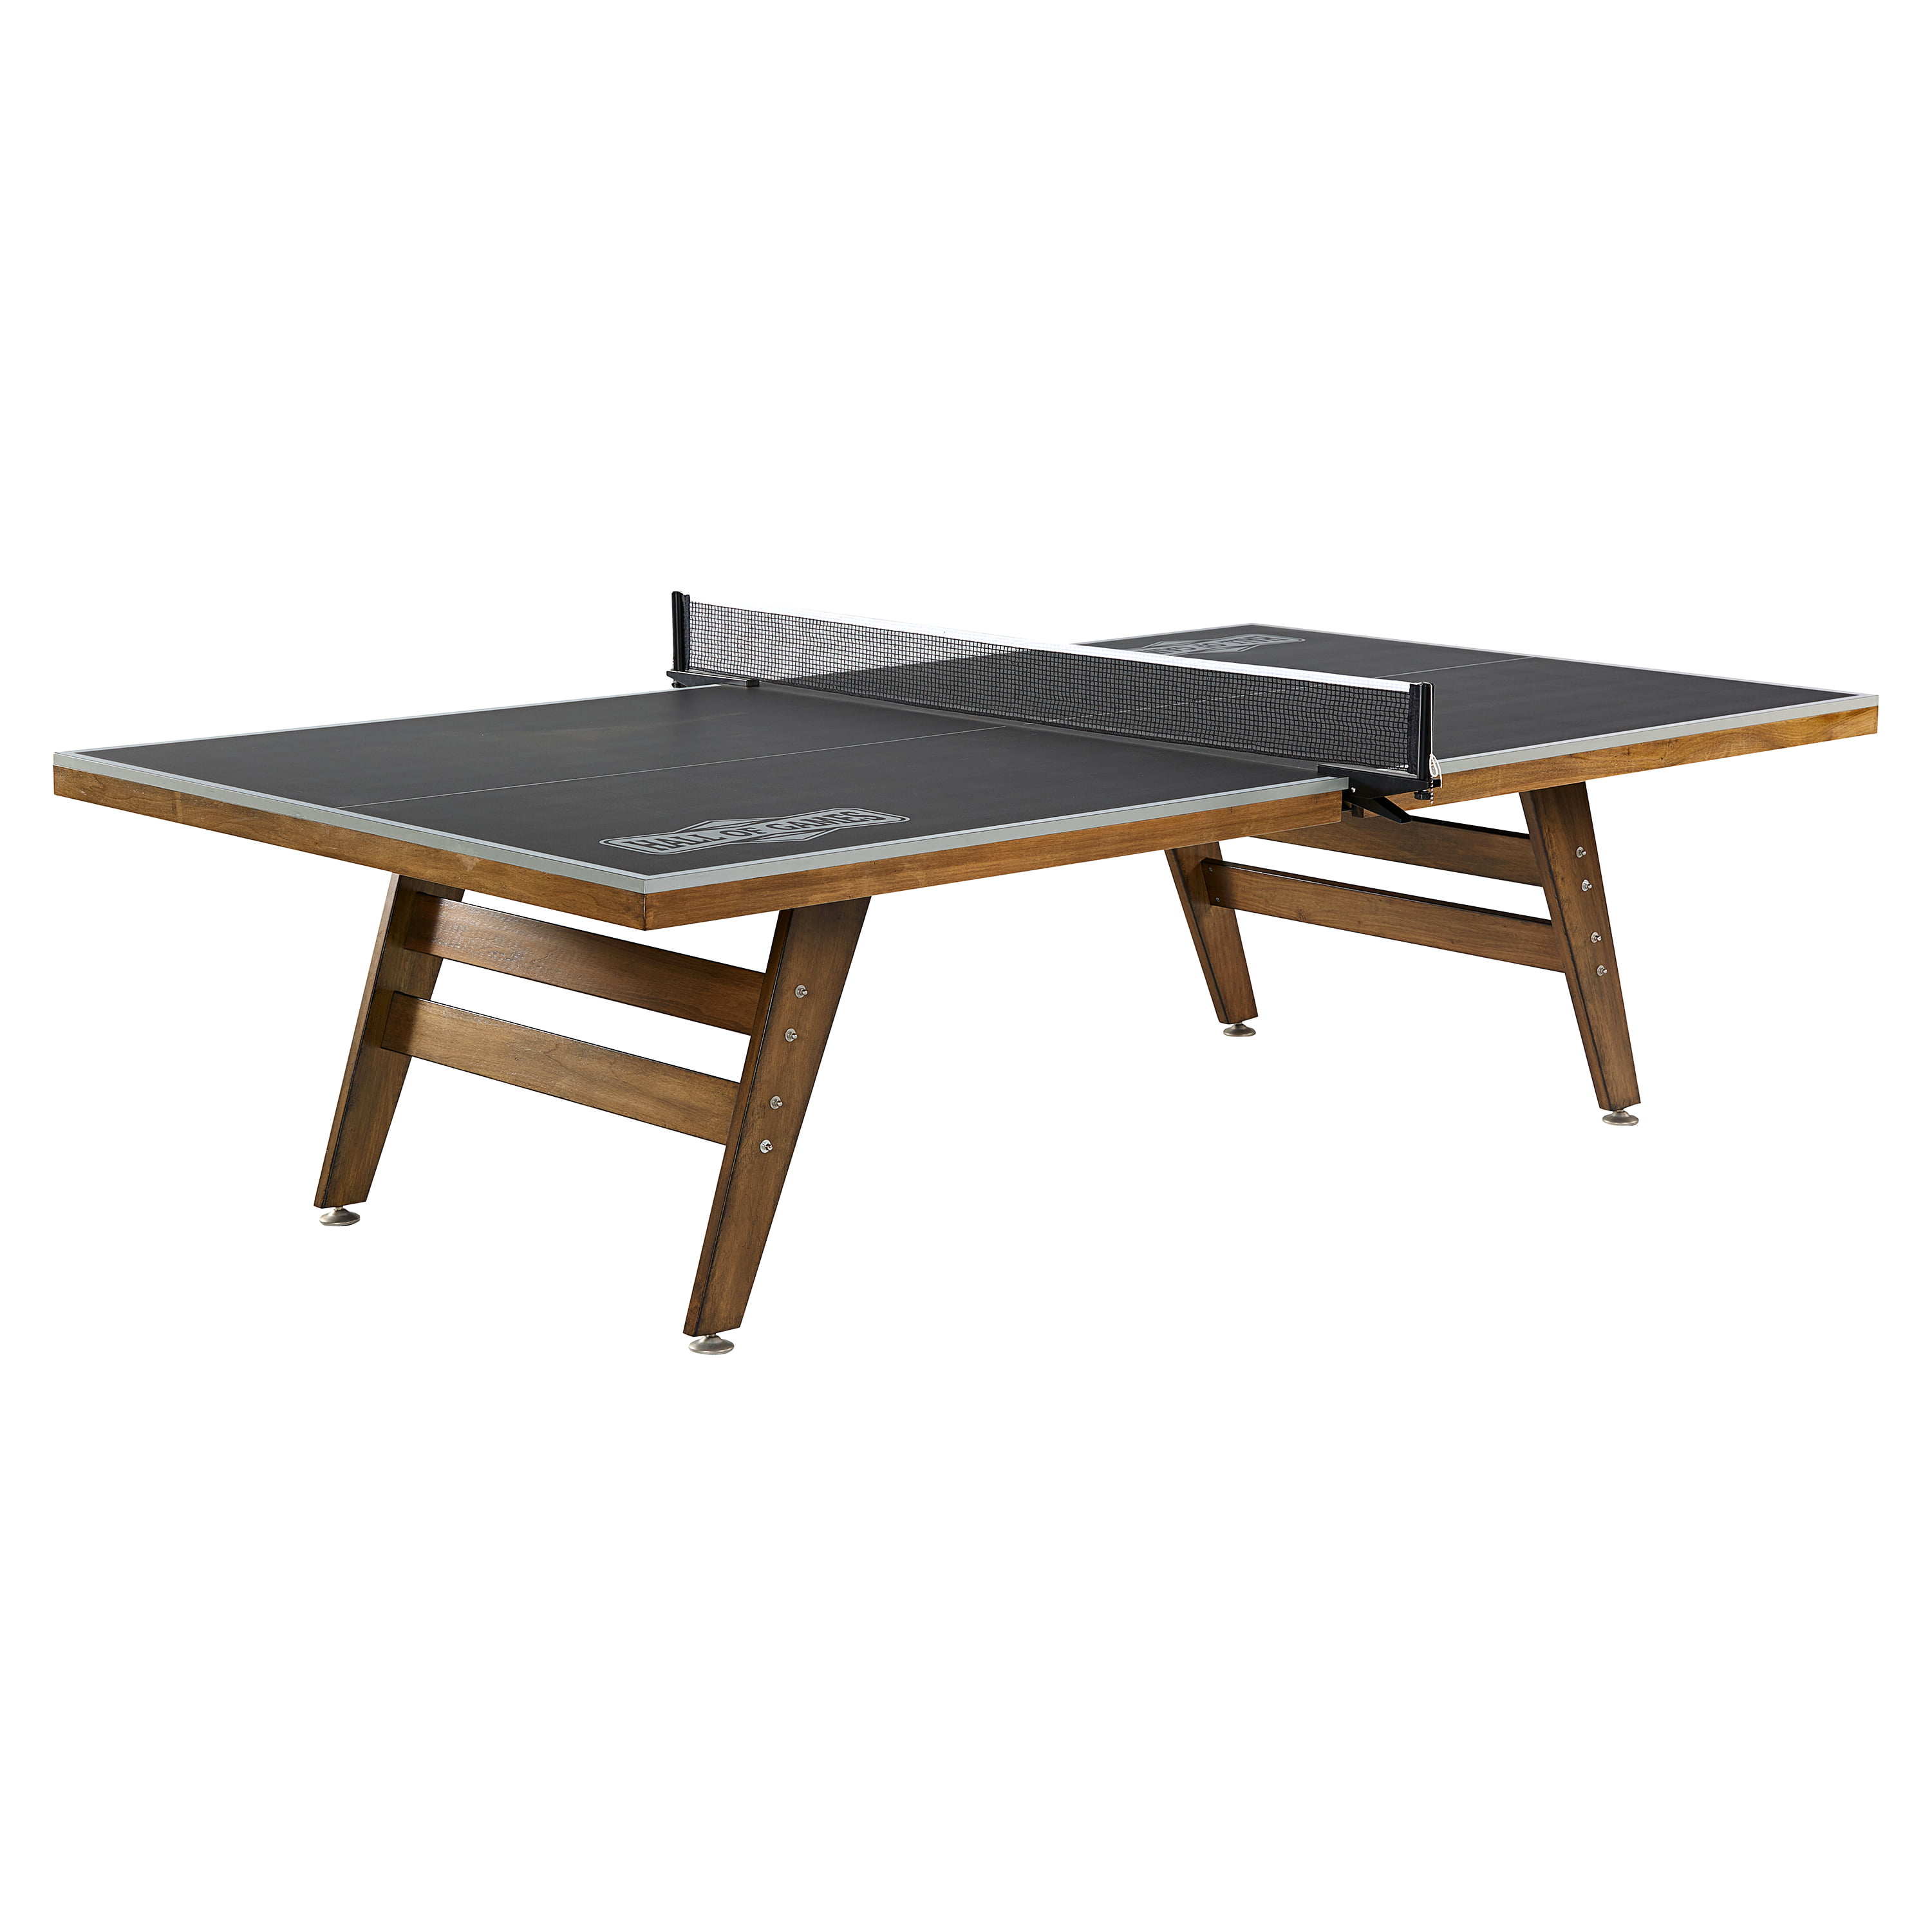 Hall Of Games Official Size 19mm Wood Table Tennis Table With Net And Post Walmartcom Walmartcom